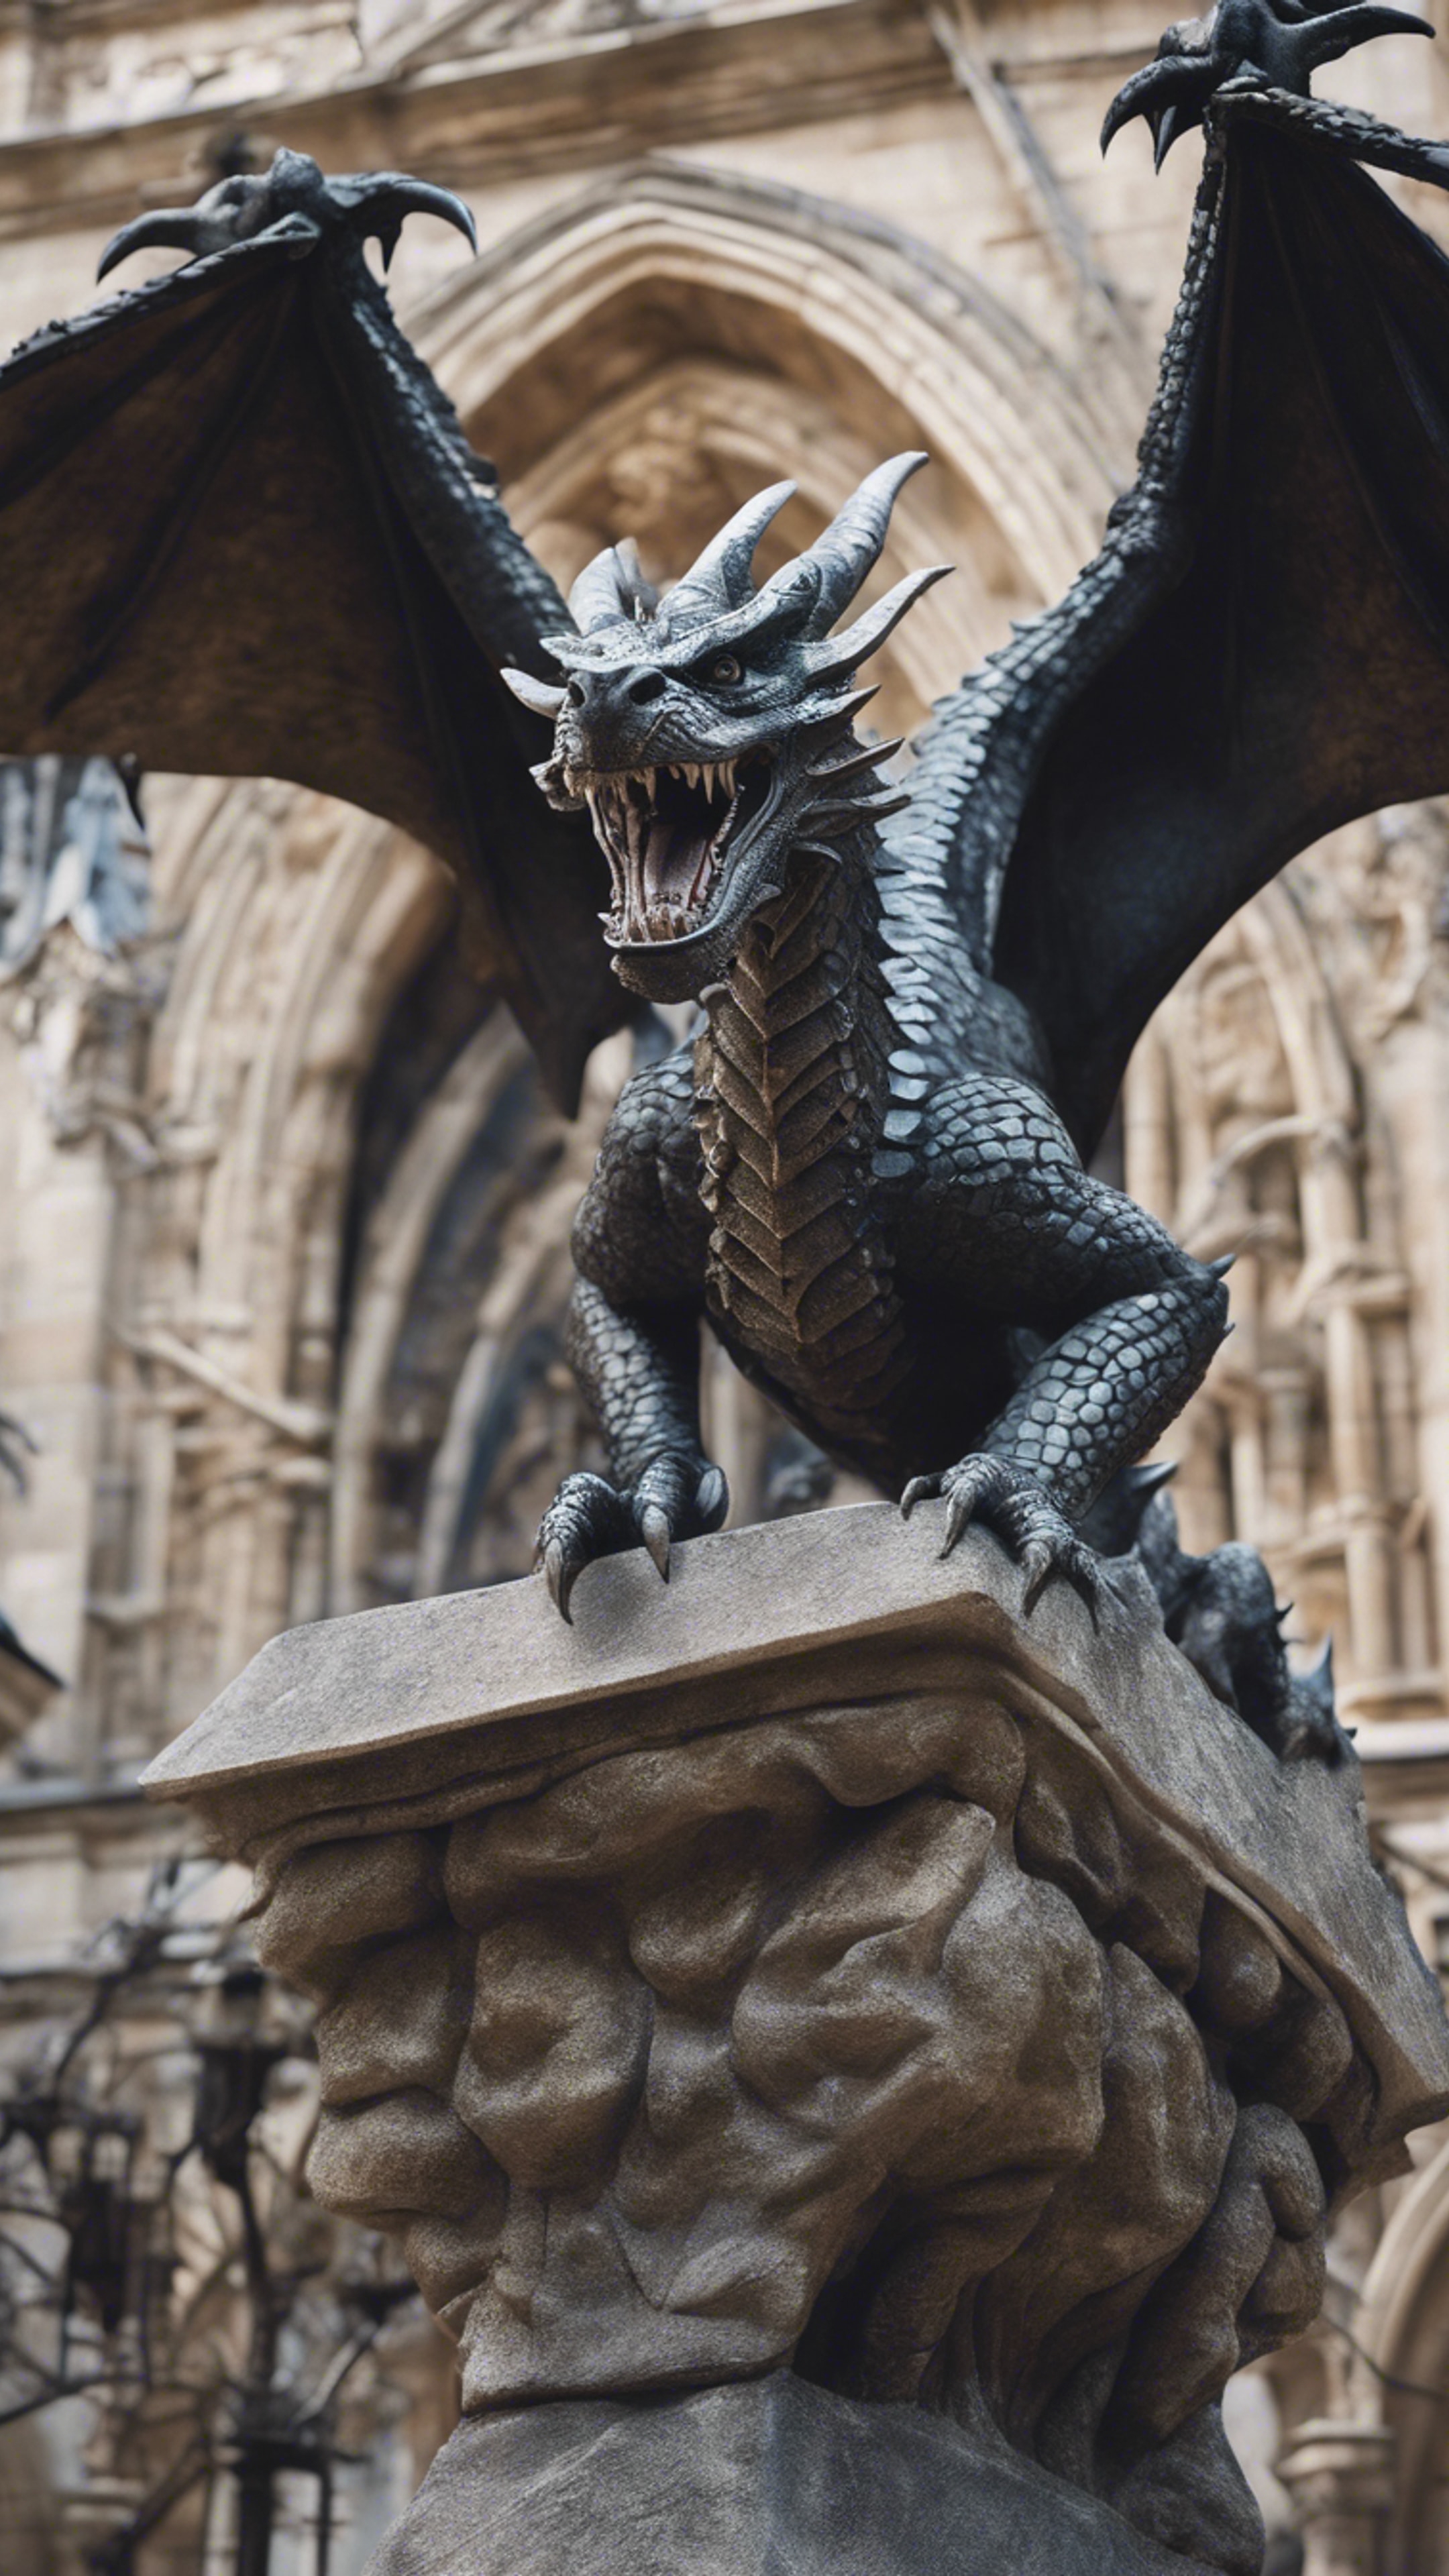 A stone dragon coming to life from the sculpture in a gothic cathedral's courtyard. Hình nền[86d9df9db55943e58db6]